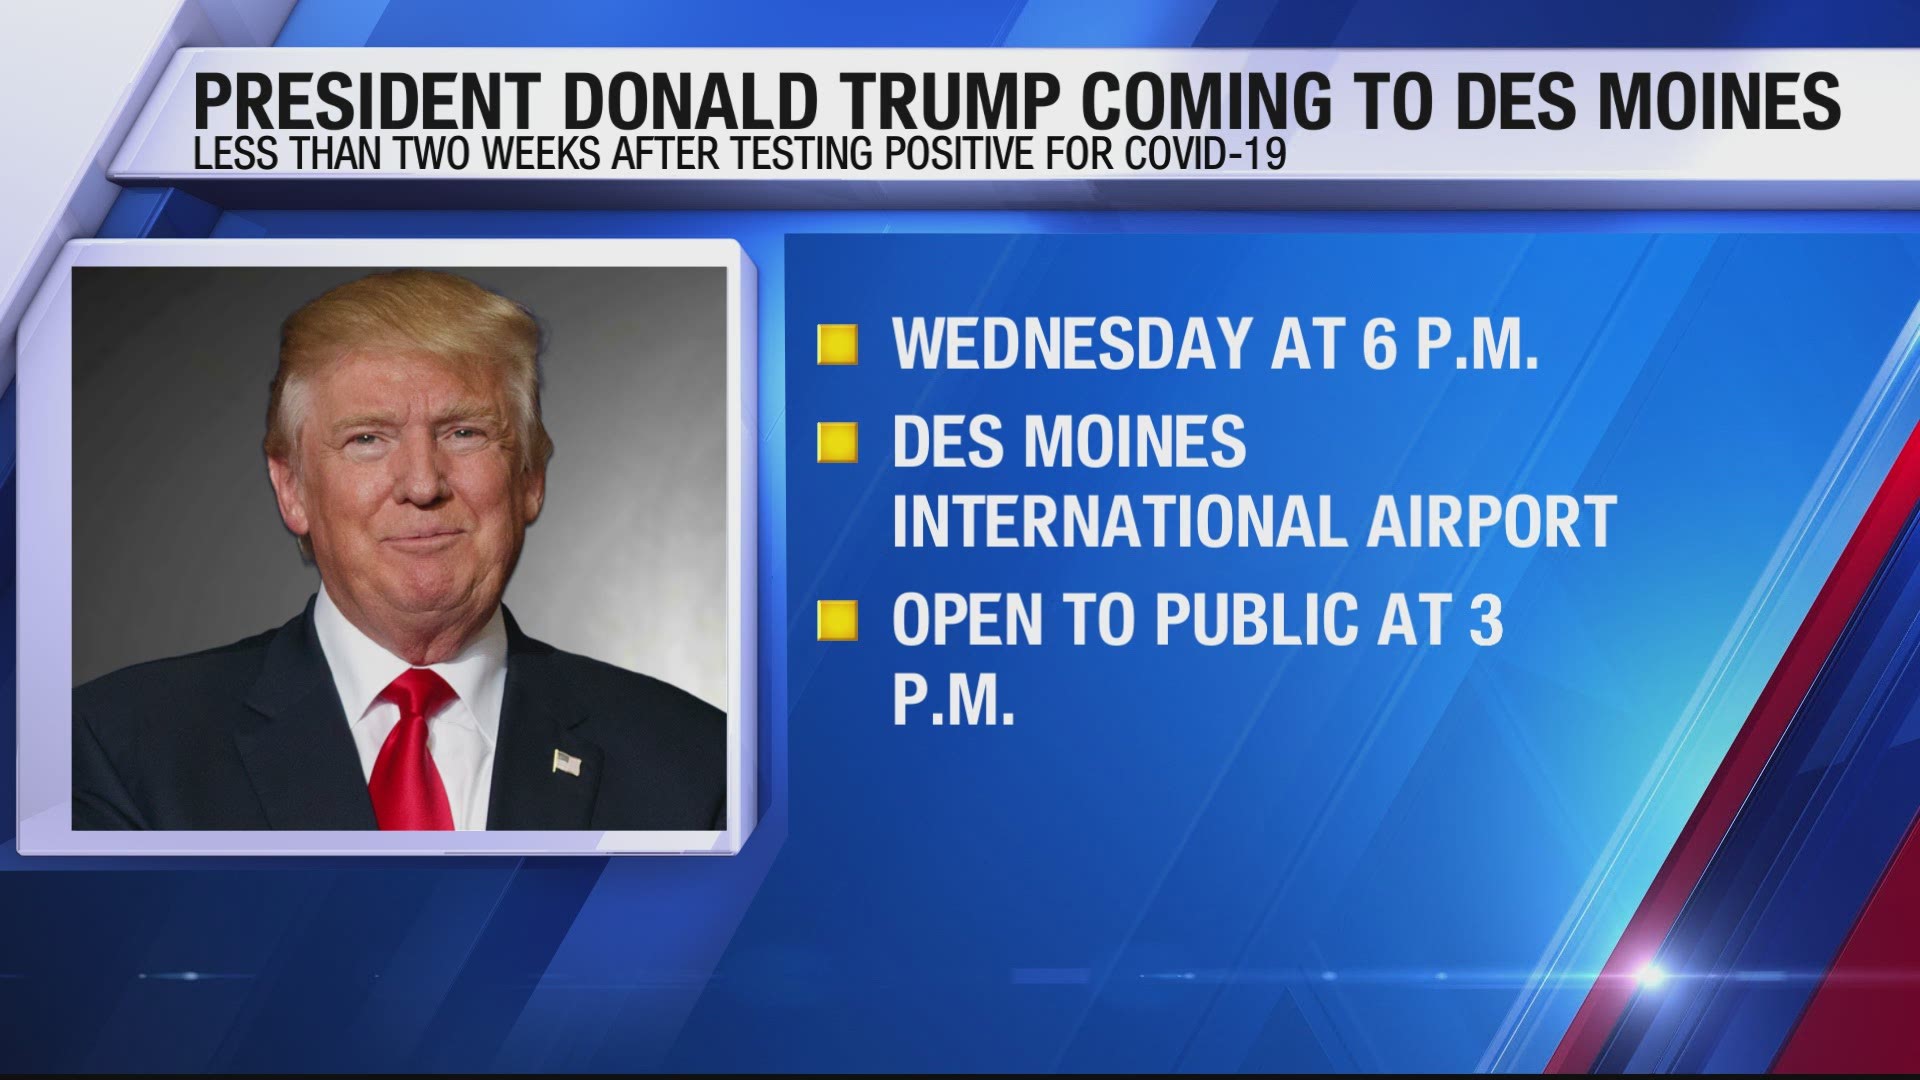 President Donald Trump will be in Des Moines Wednesday to deliver remarks. This comes just over a week since he tested positive for COVID-19.